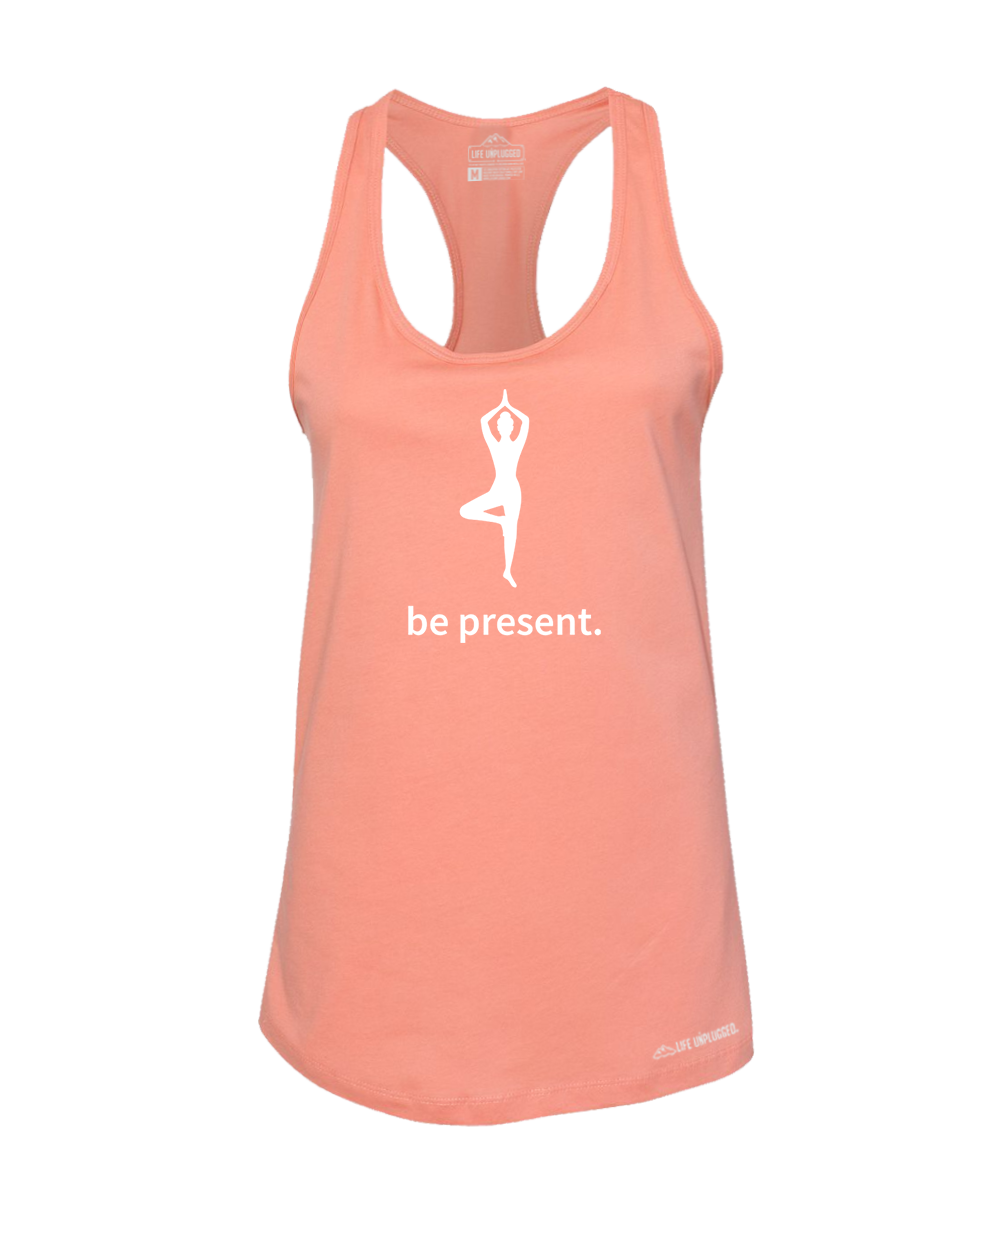 Yoga Premium Women's Relaxed Fit Racerback Tank Top - Life Unplugged